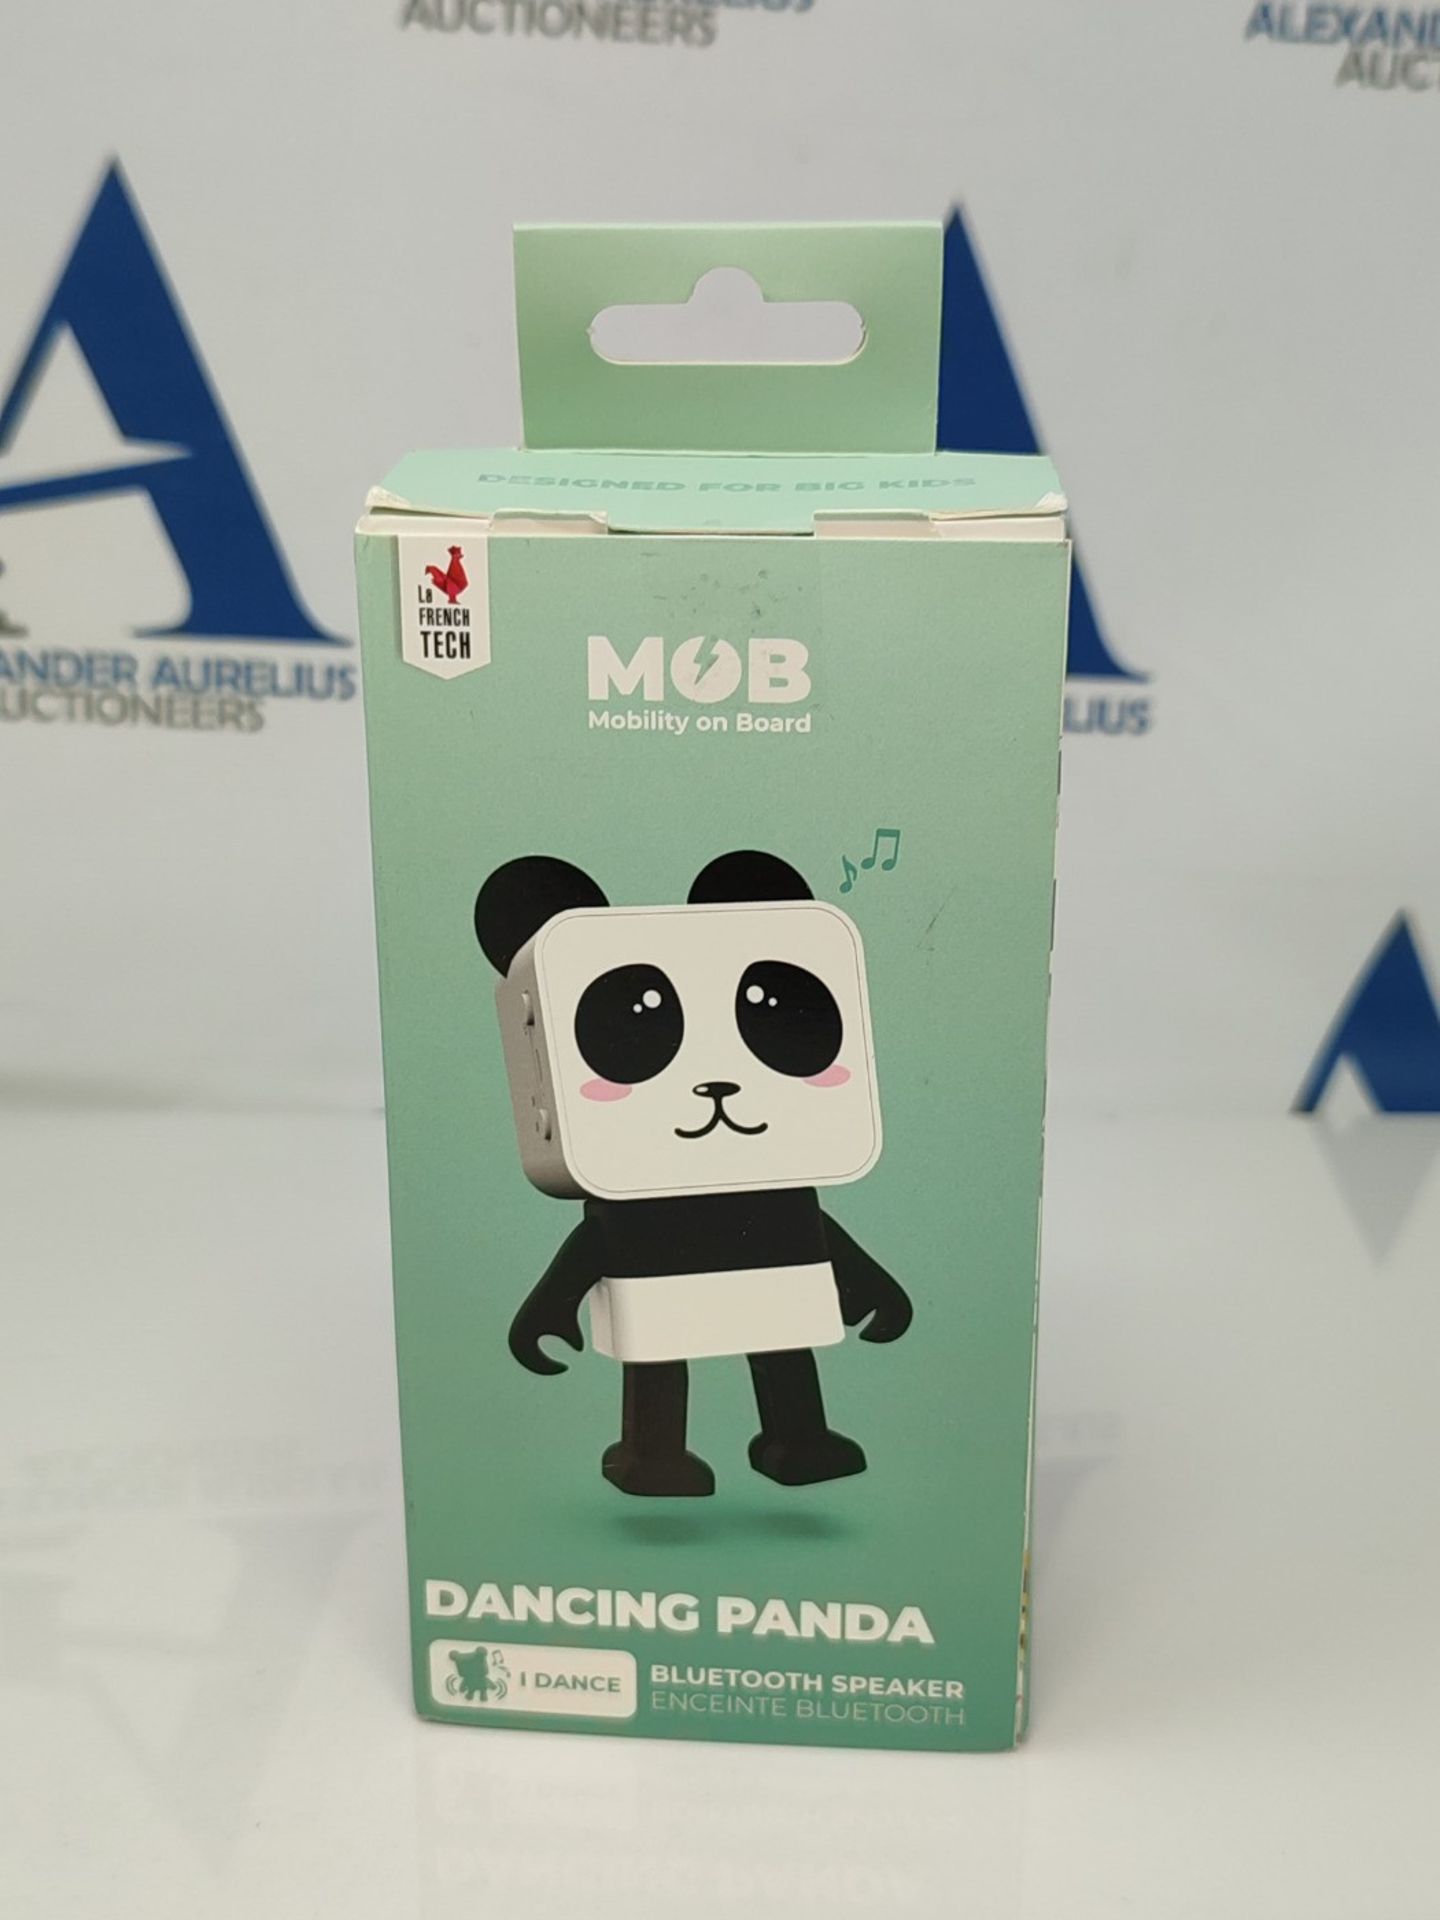 Mobility on Board - Speakers for Animal Dance Party (Panda) - Image 2 of 6